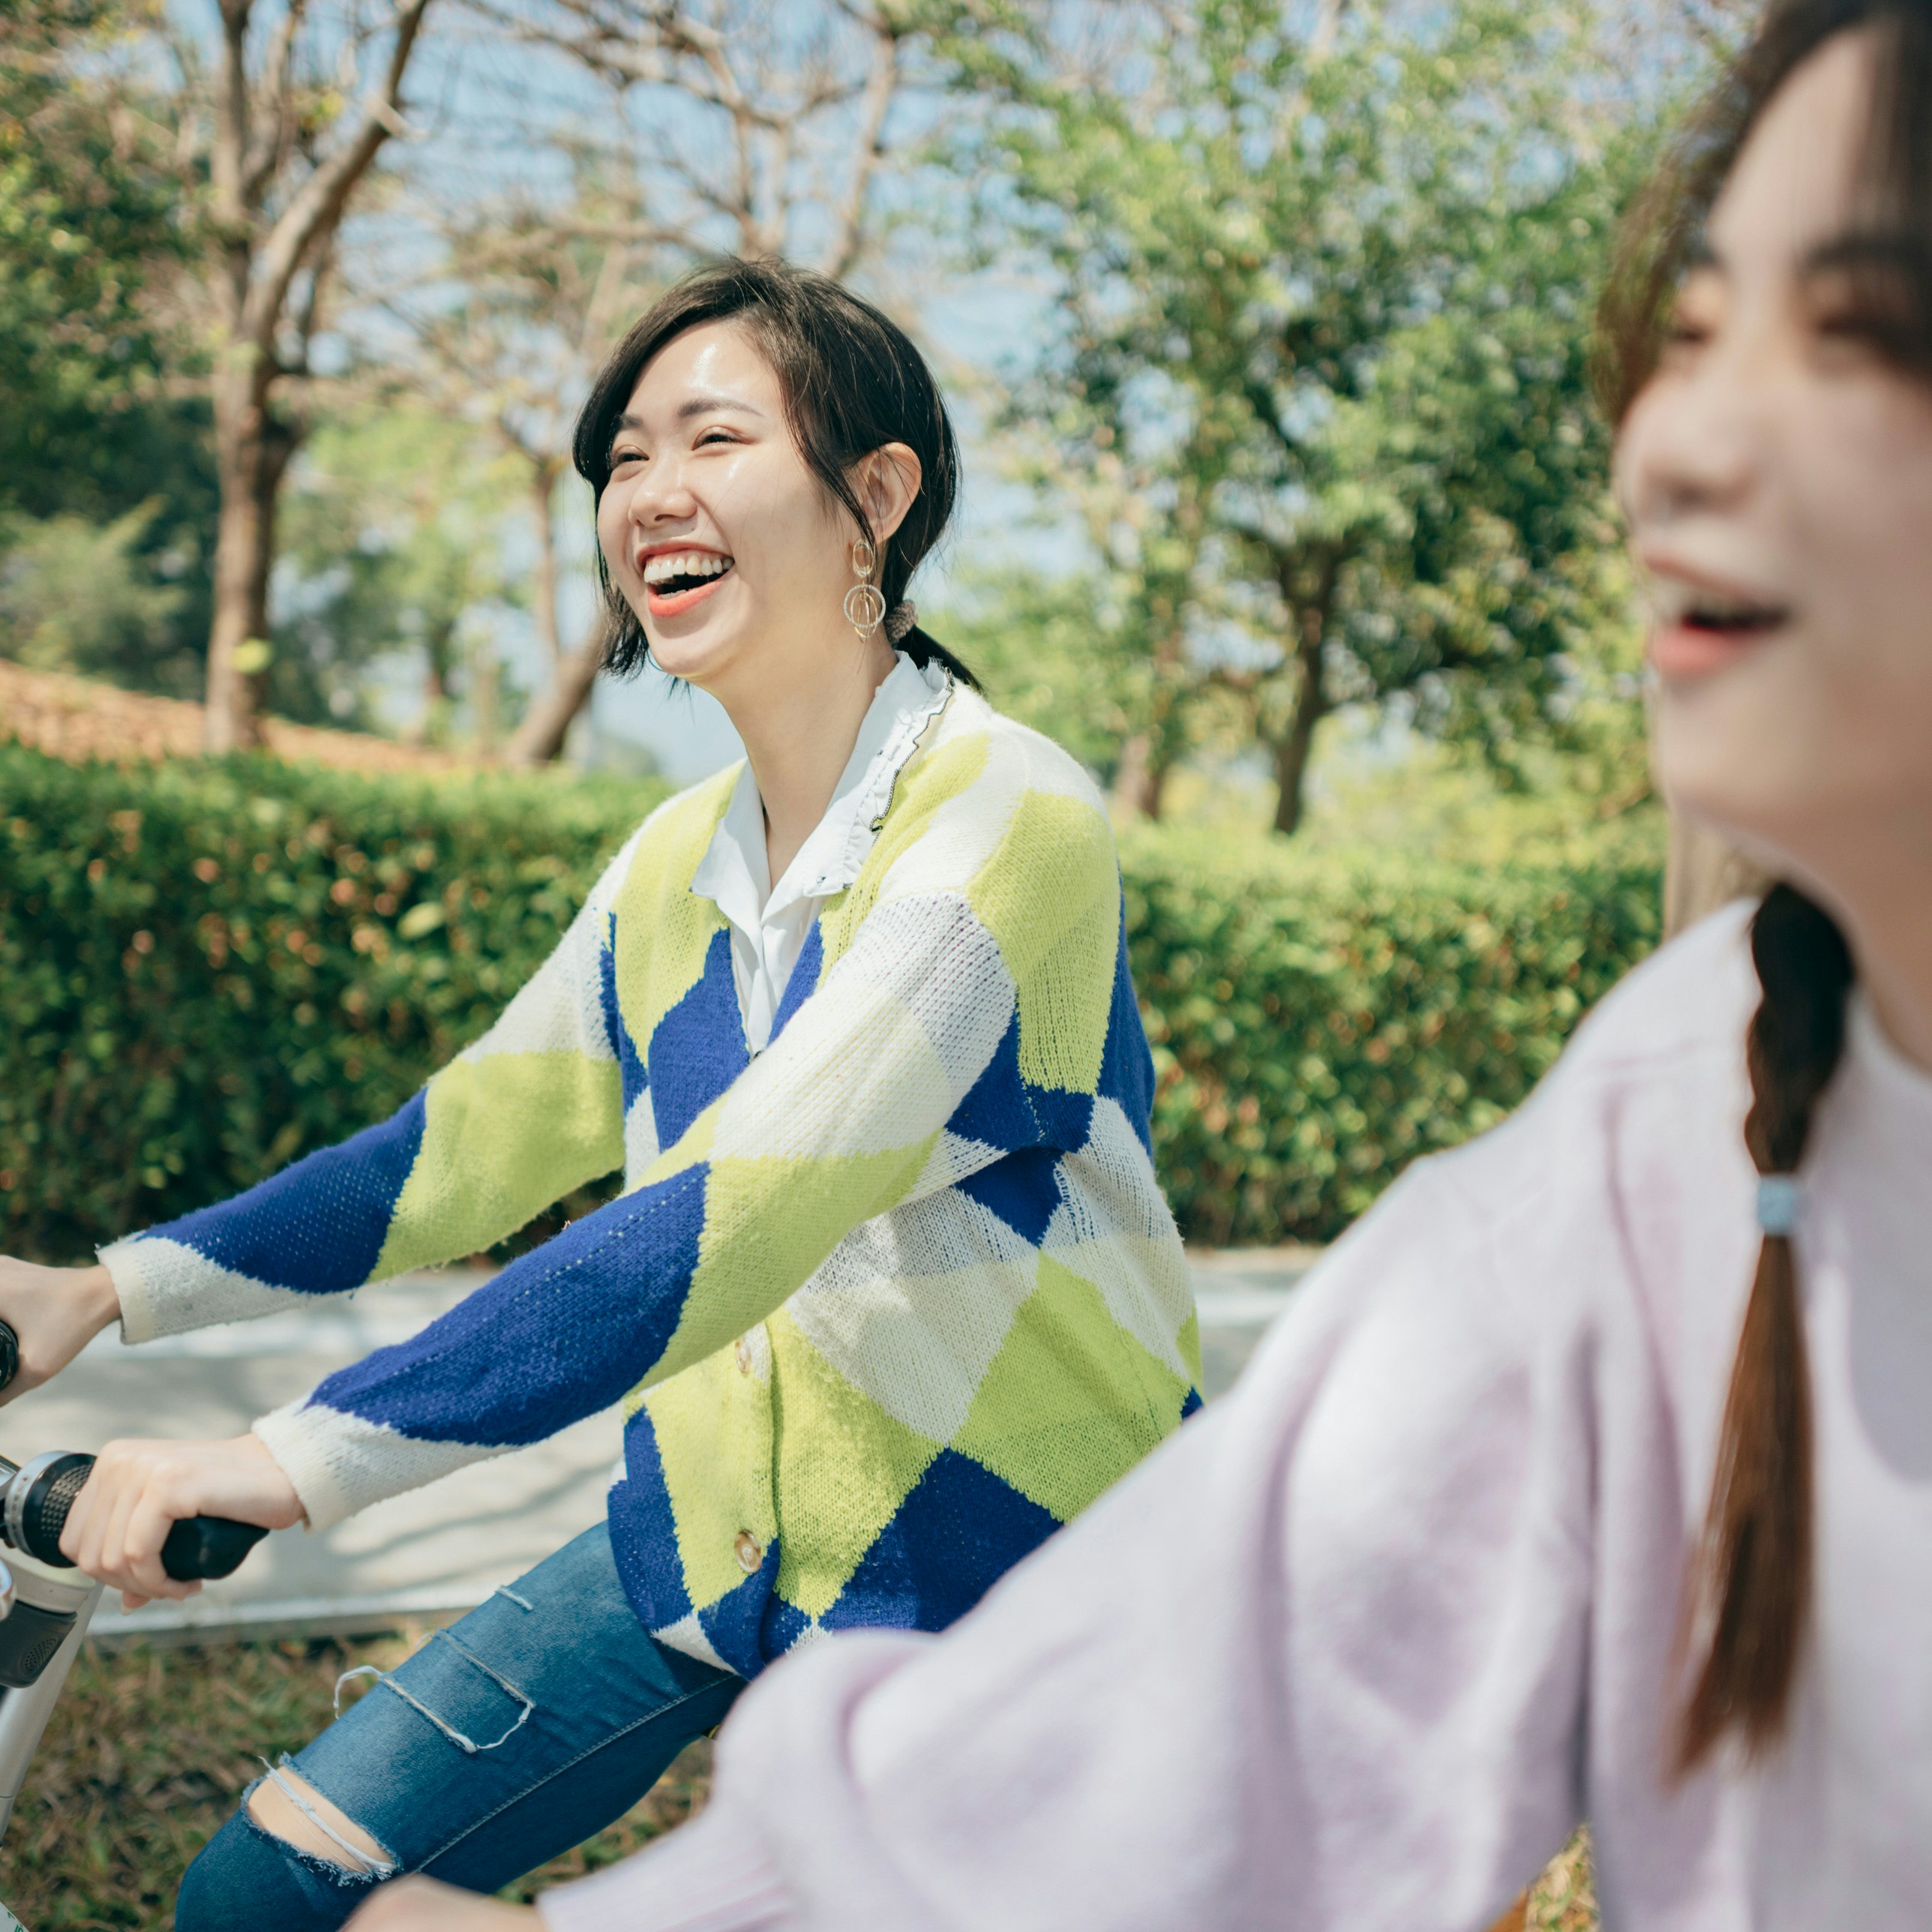 Two asian women renting bicycles to travel in the city